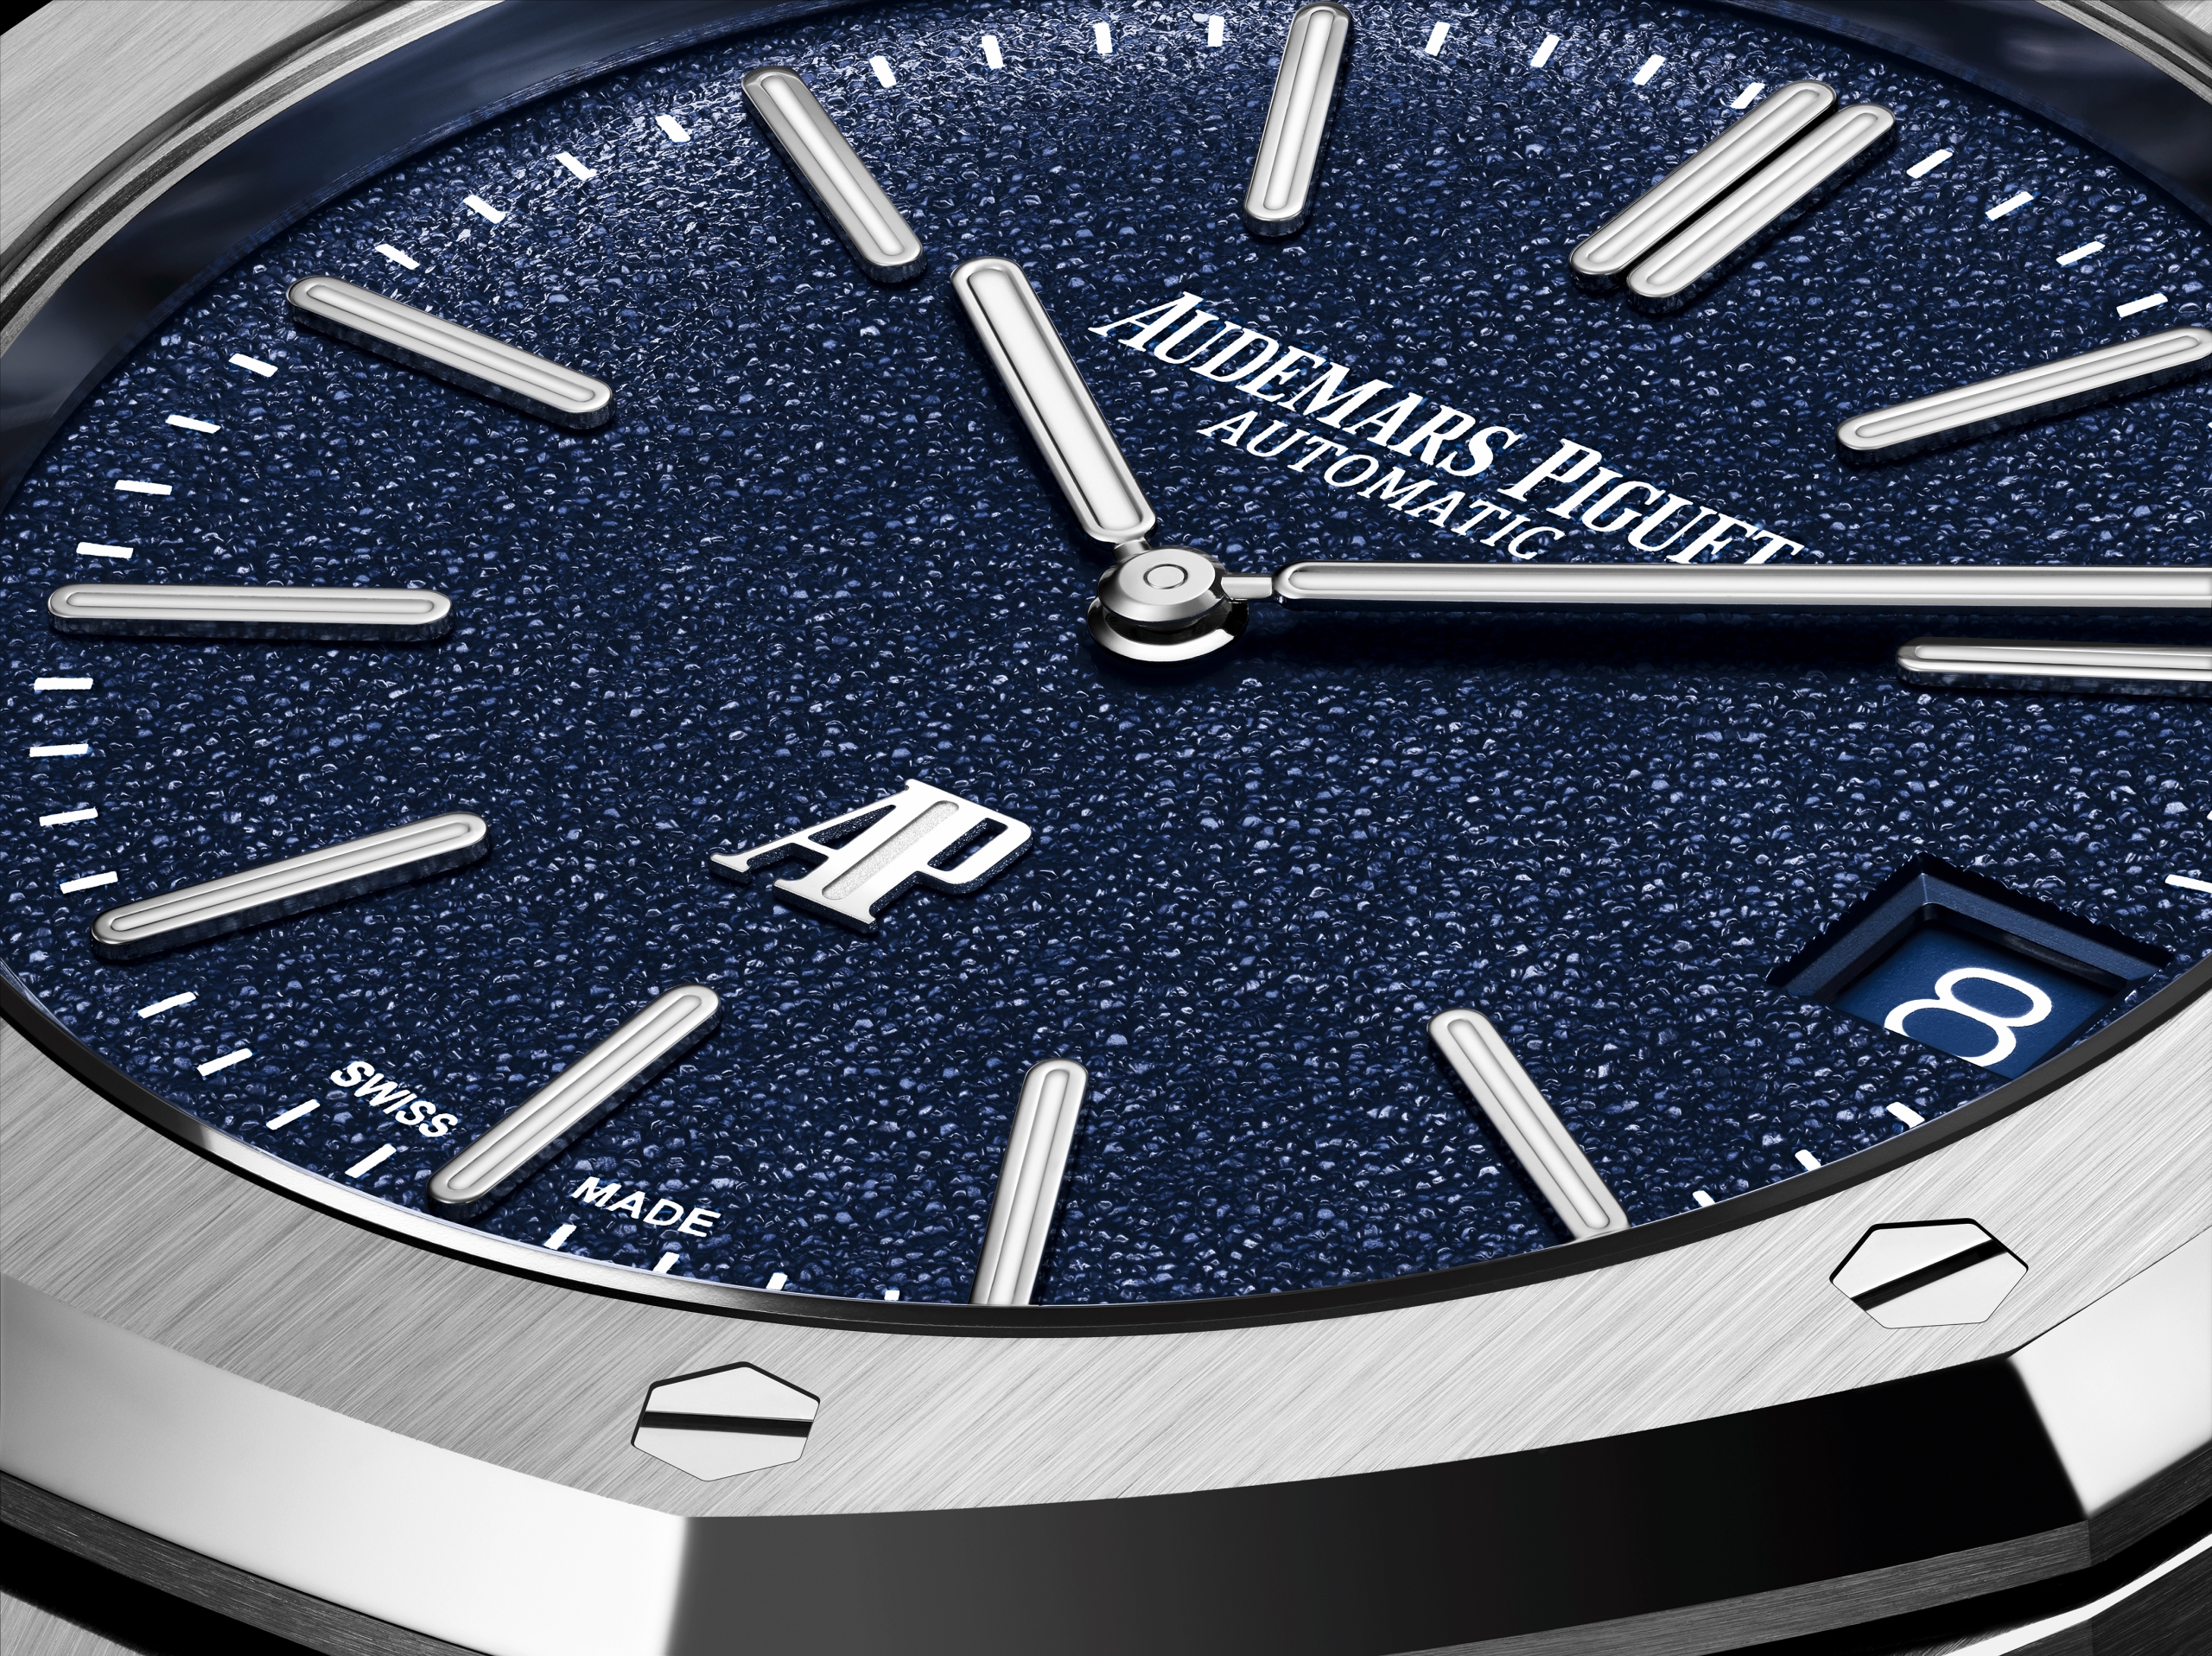 Audemars Piguet Royal Oak Extra-Thin "Jumbo" with Blue Grained Dial close-up